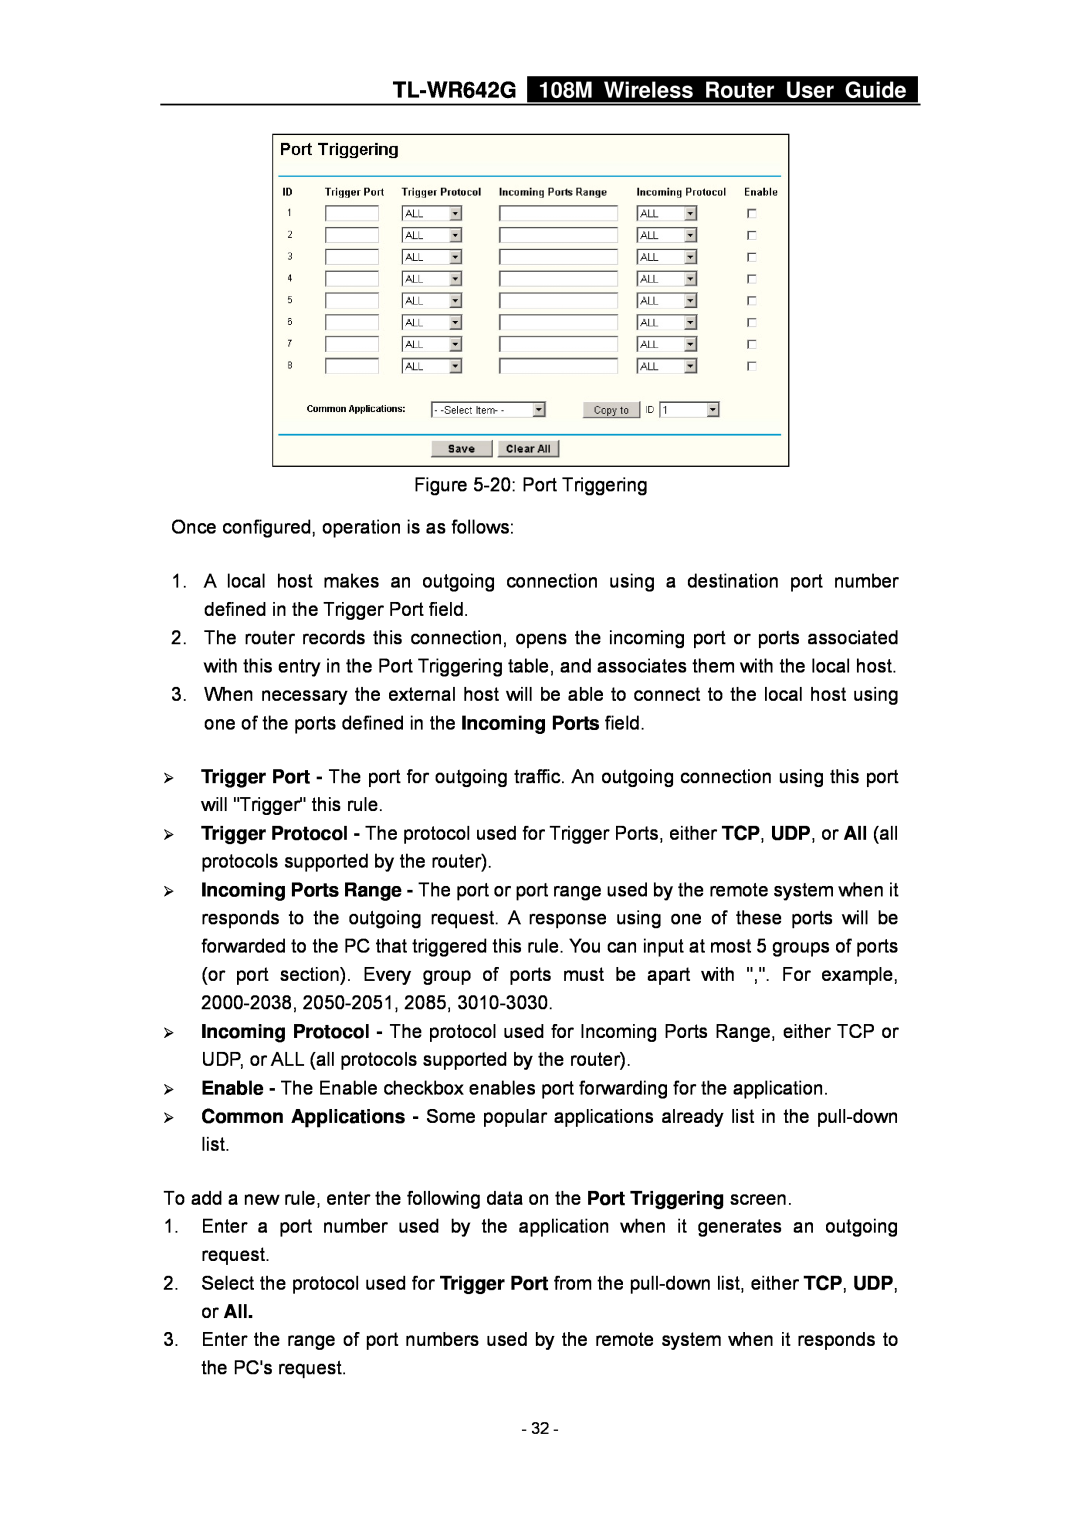 TP-Link manual TL-WR642G 108M Wireless Router User Guide, 20 Port Triggering Once configured, operation is as follows 